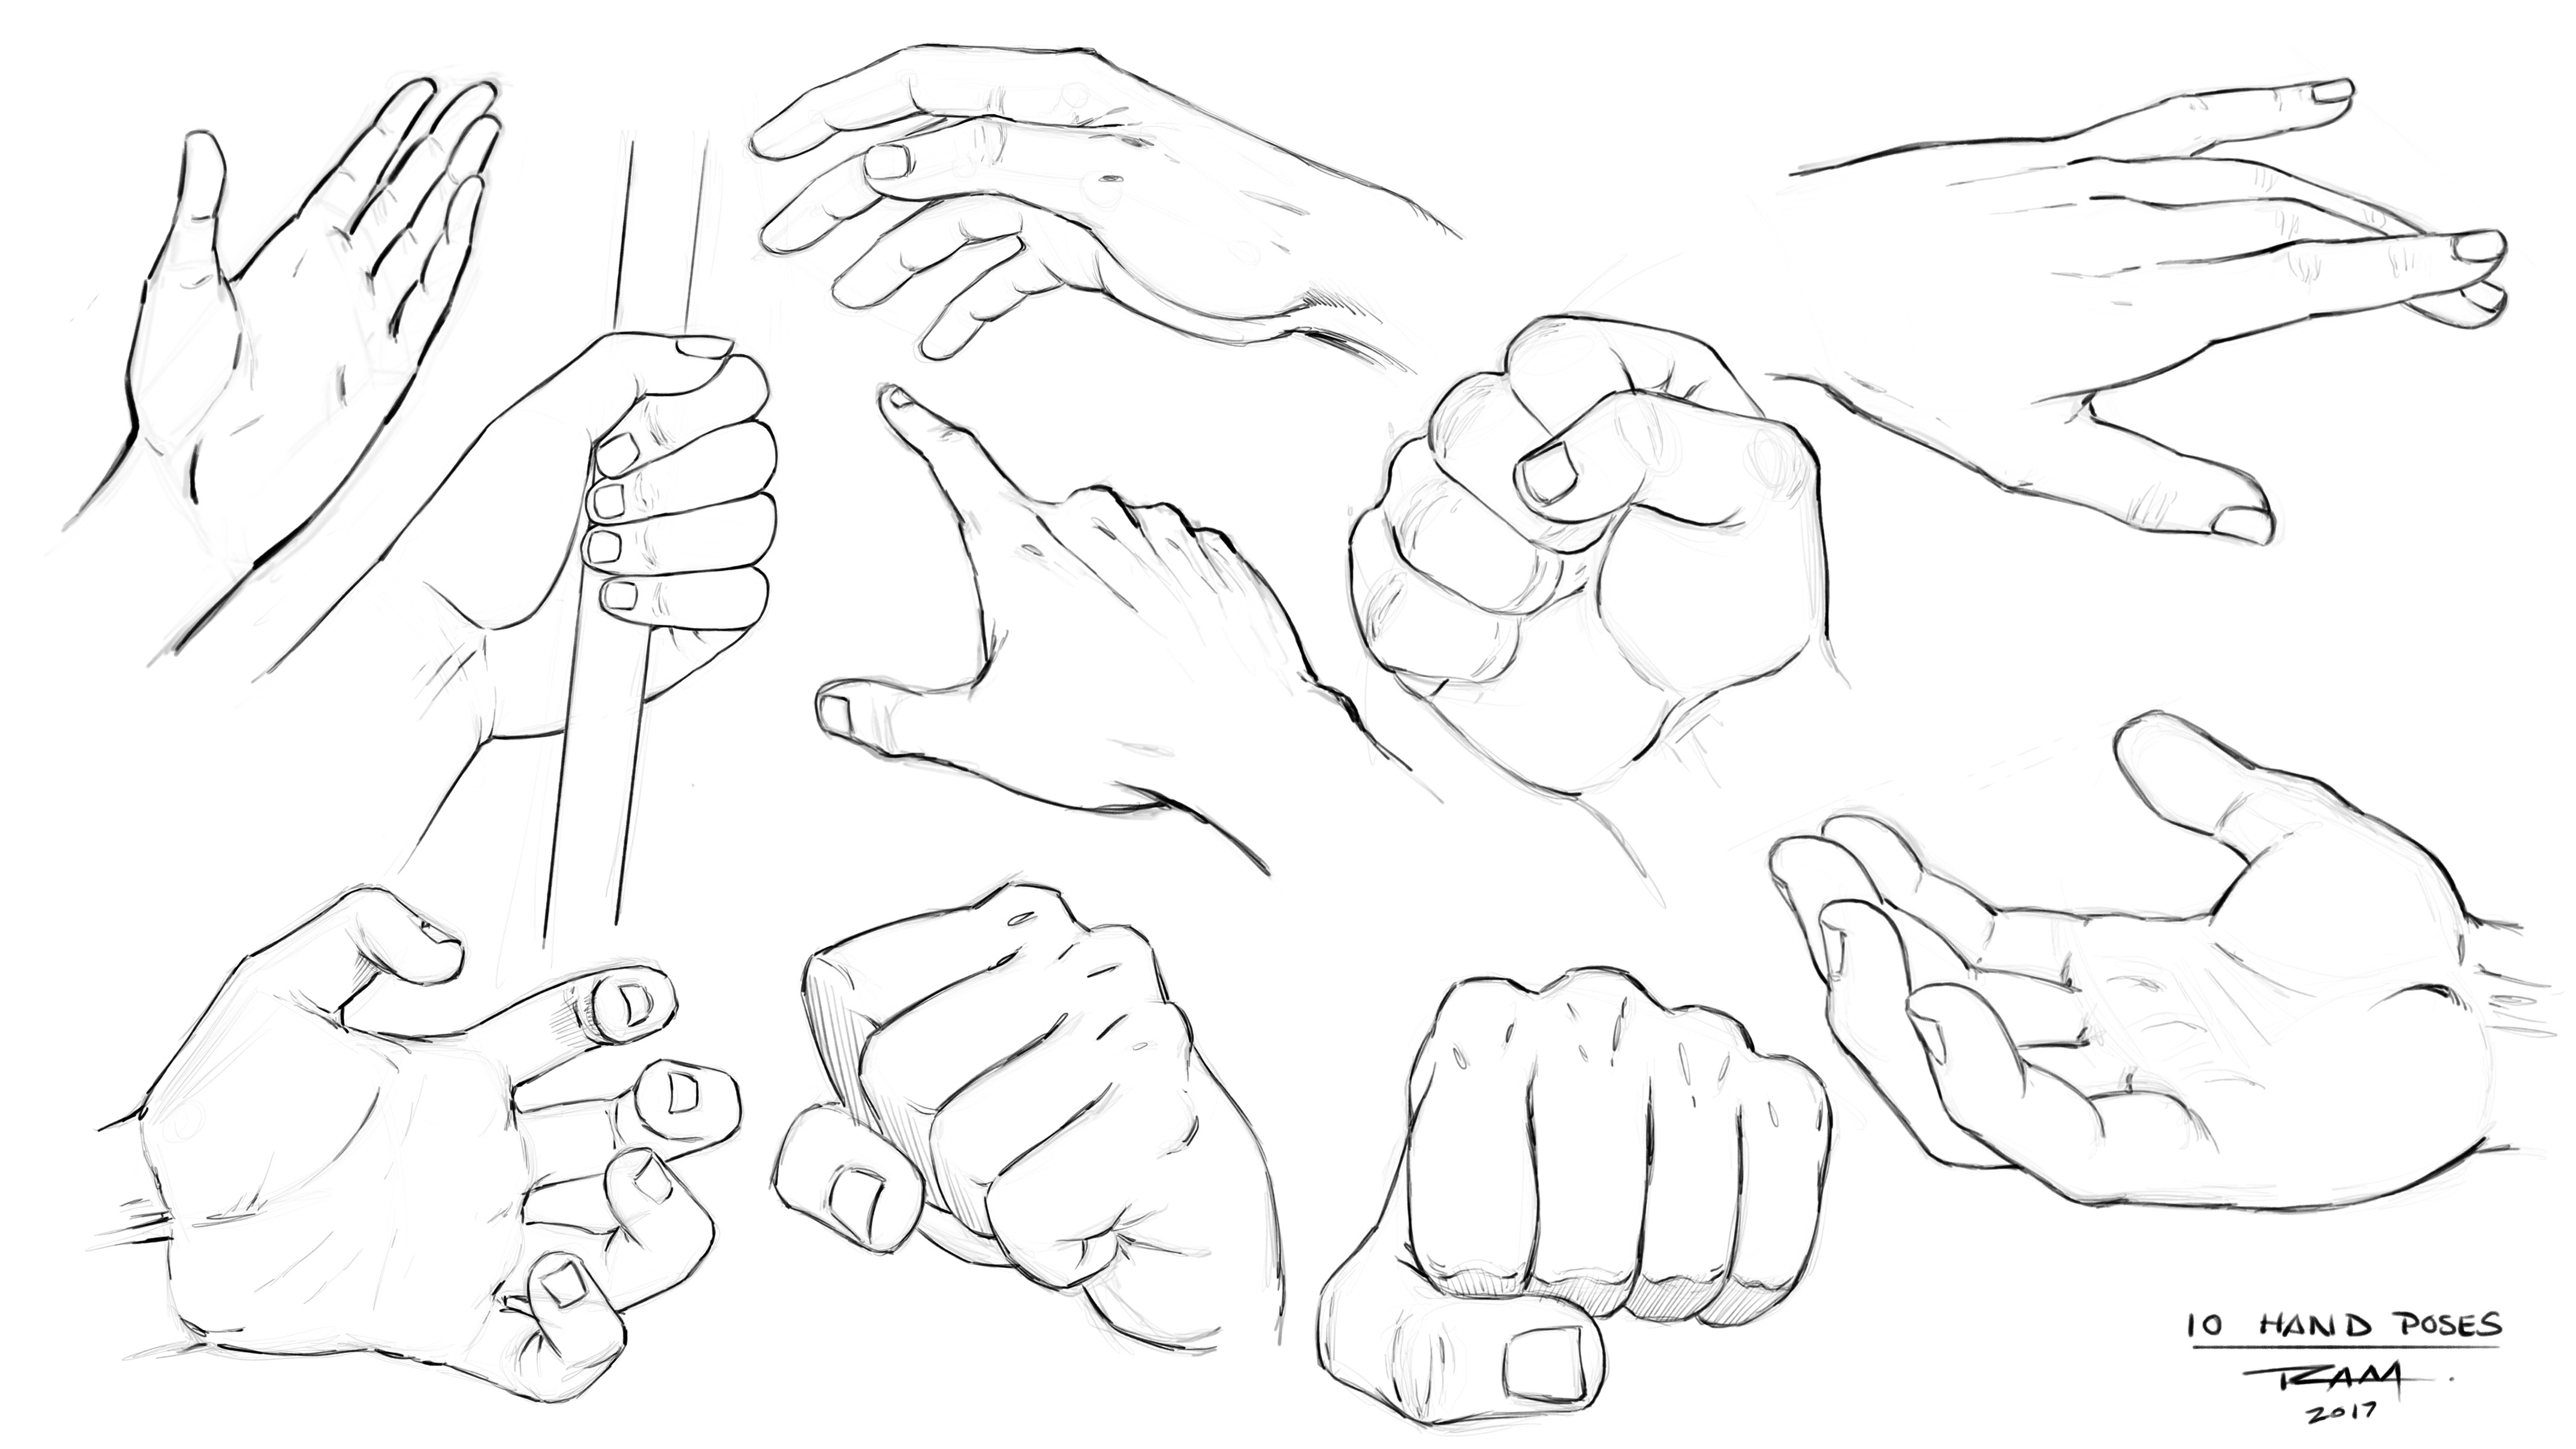 Hand Poses Vector PNG Images, Hand Pose Free Vector, Finger, Gesture,  Vector PNG Image For Free Download